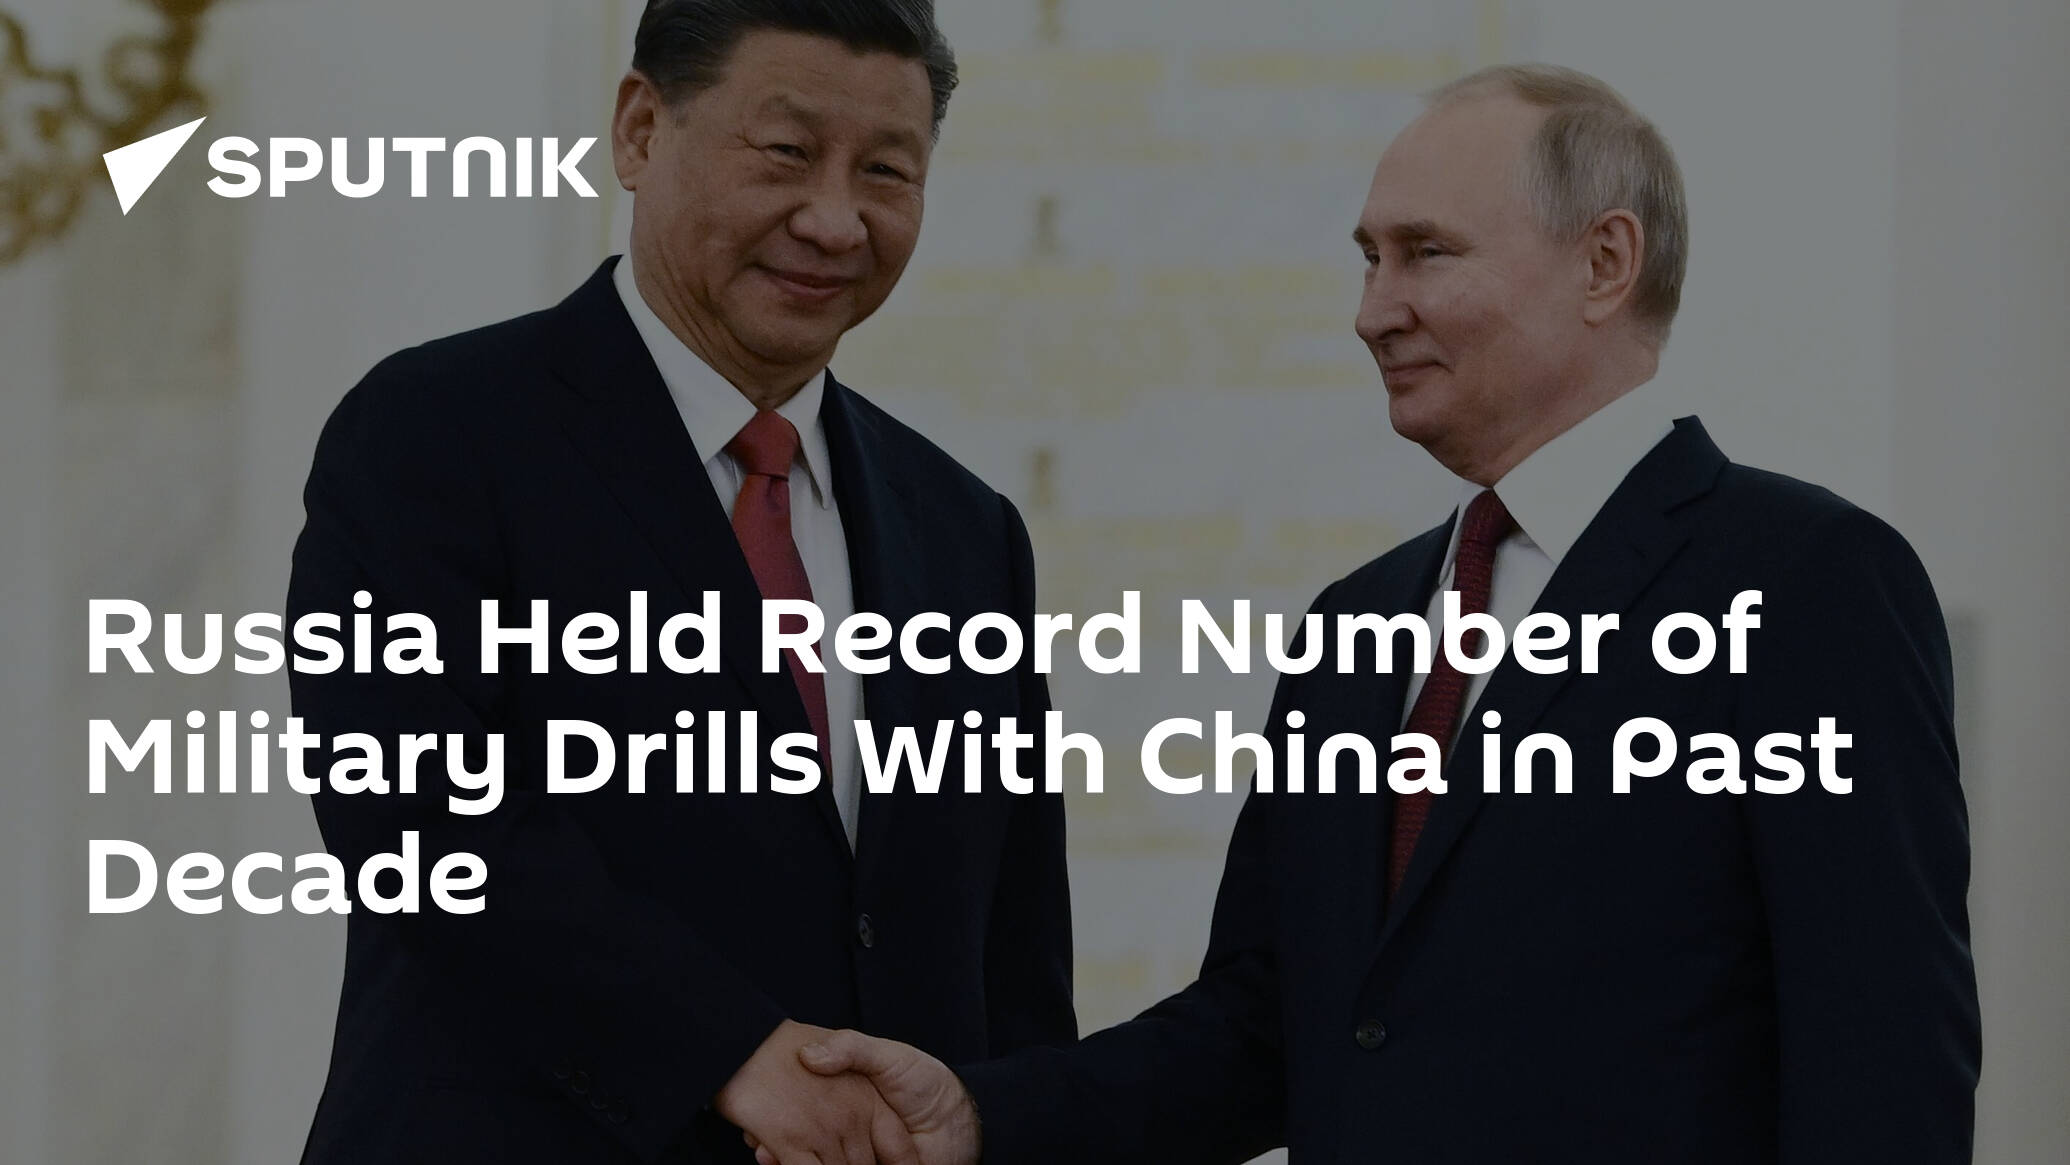 Russia Conducted Highest Number of Military Drills With China in Past Decade